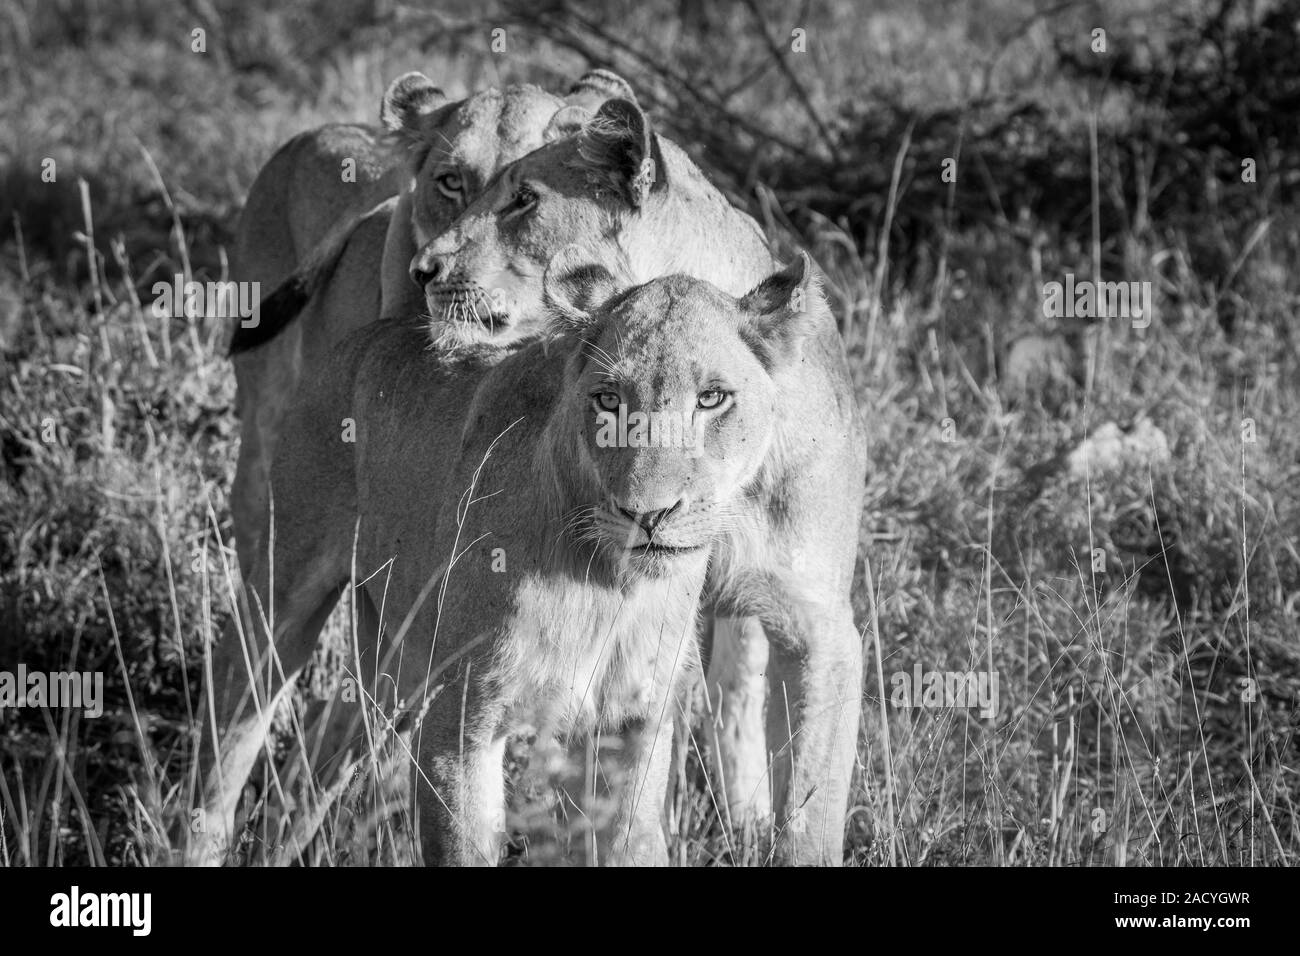 Bonding Lions in black and white in the Kruger National Park Stock Photo